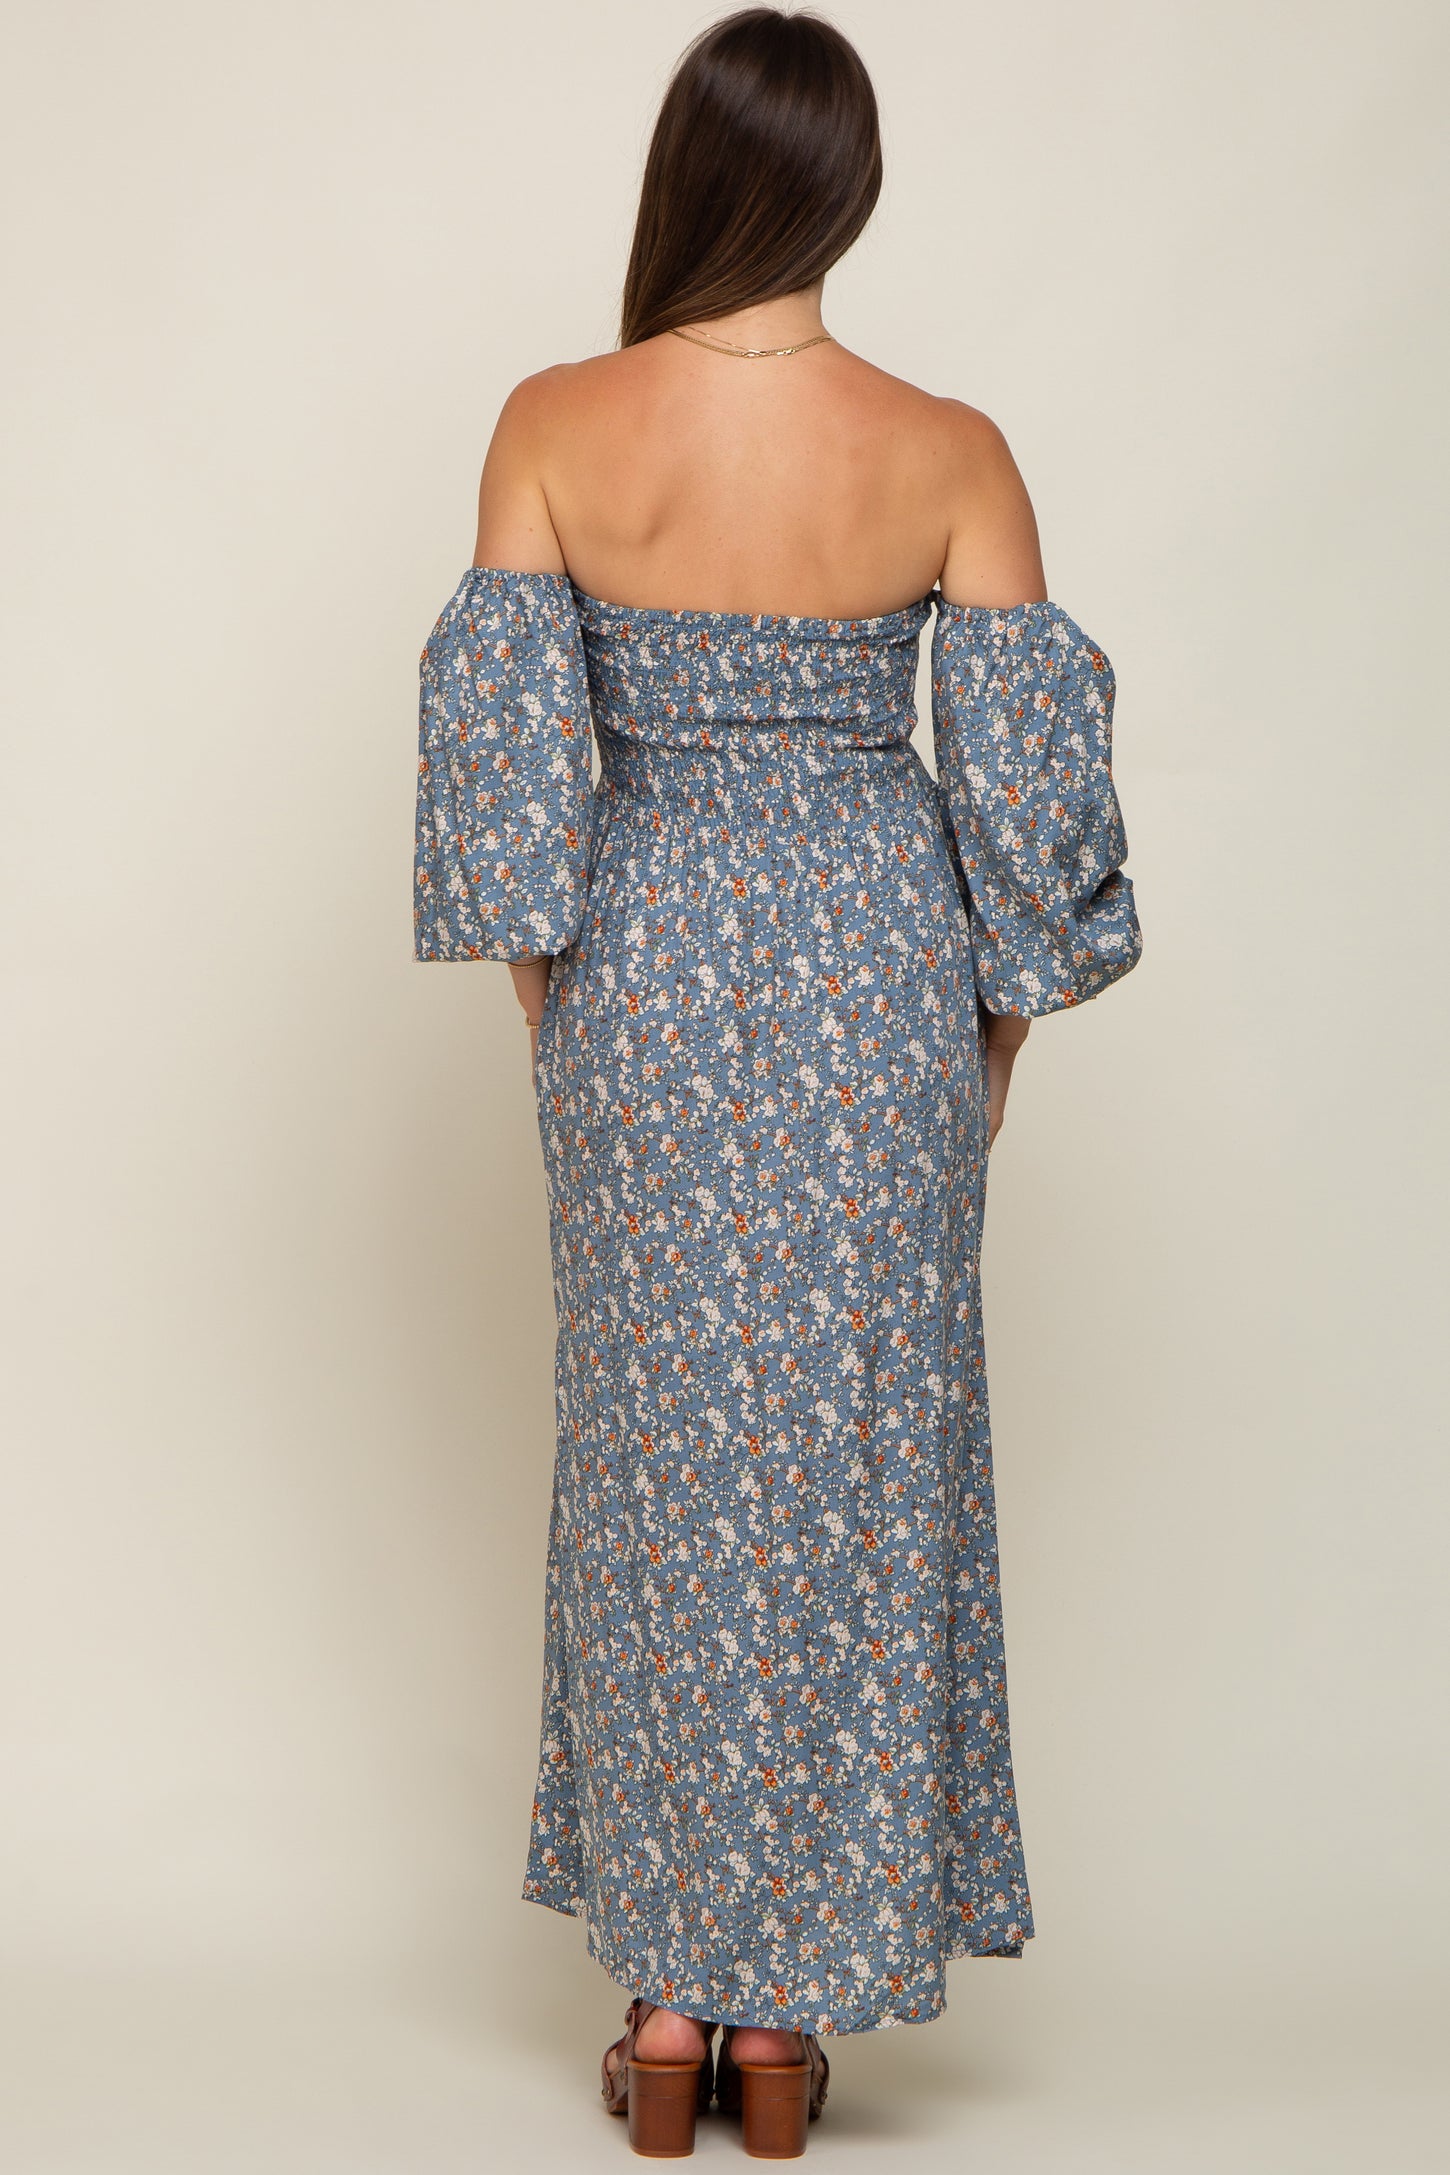 Blue Floral Square Neck Smocked Long Sleeve Maternity Maxi Dress